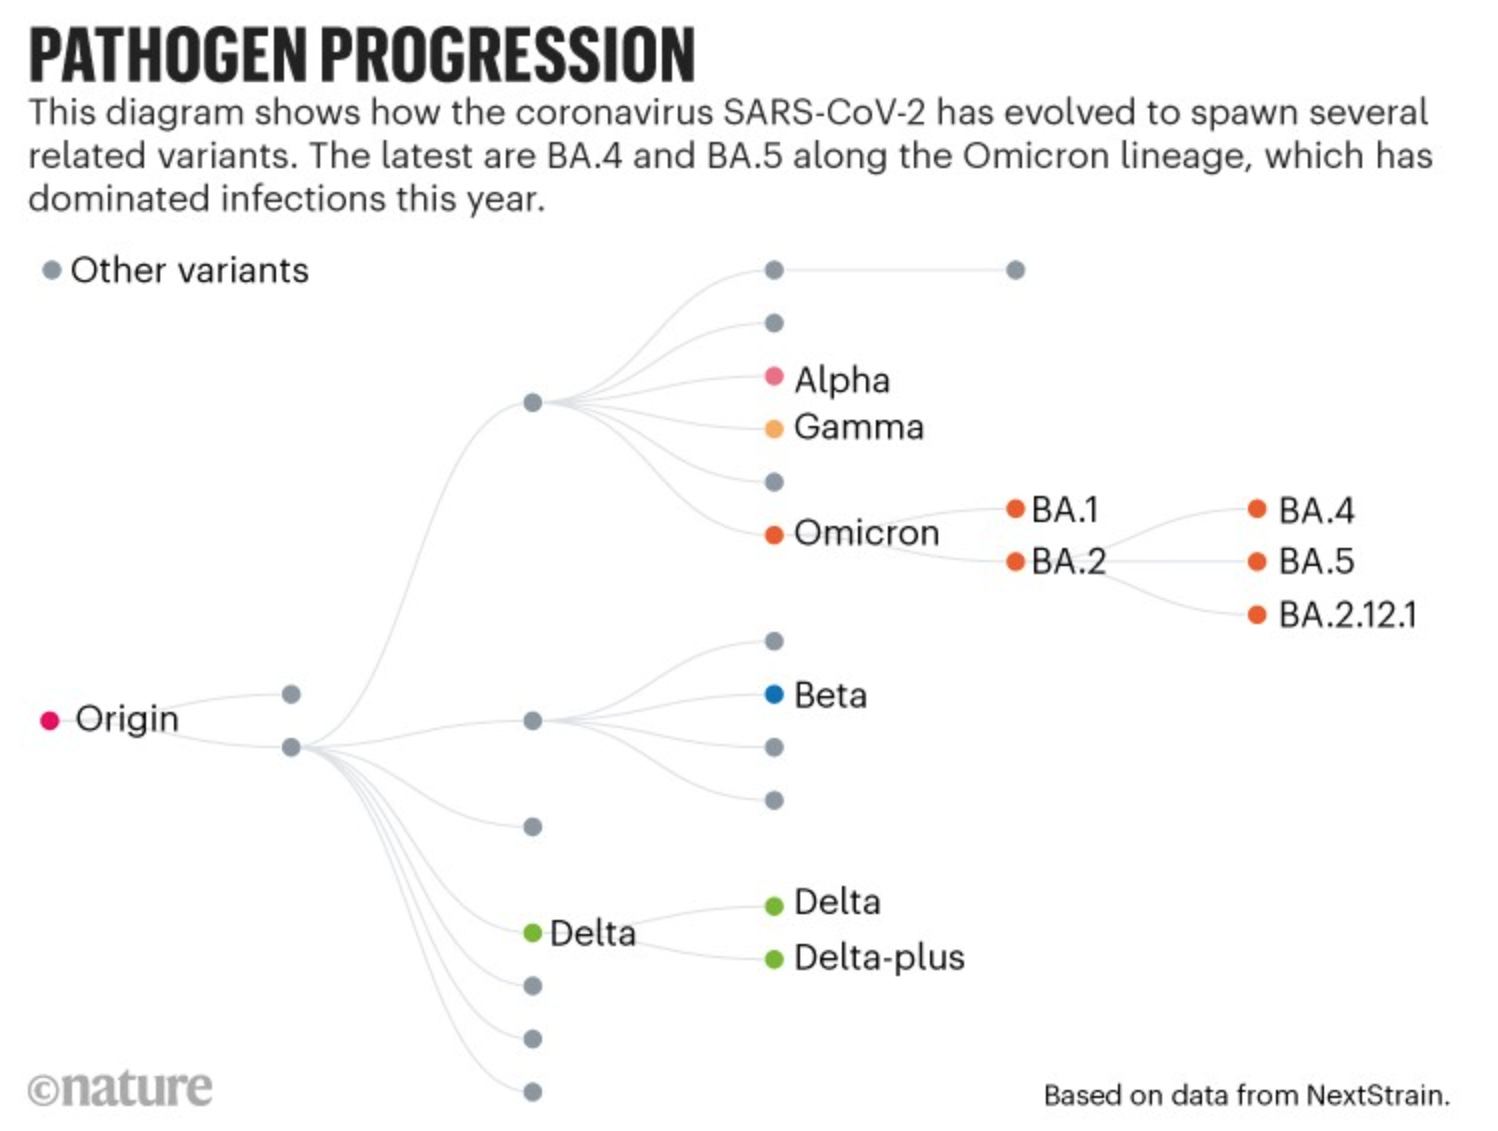 At the top, bold text says "Pathogen Progression." Below the title, text says, "A diagram showing how the coronavirus SARS-CoV-2 has evolved to spawn several related variants. The latest are BA.4 and BA.5 along the Omicron lineage, which has dominated infections this year." The diagram starts with the origin on the left and branches off toward the right into several other variants, including Delta, Delta-plus, Beta, Alpha, Gamma, Omicron, BA.1, BA.2, BA.4, BA.5, and BA.2.12.1. On the bottom left corner is the copyright logo of the Nature science journal. On the bottom right, text says "based on data from NextStrain."